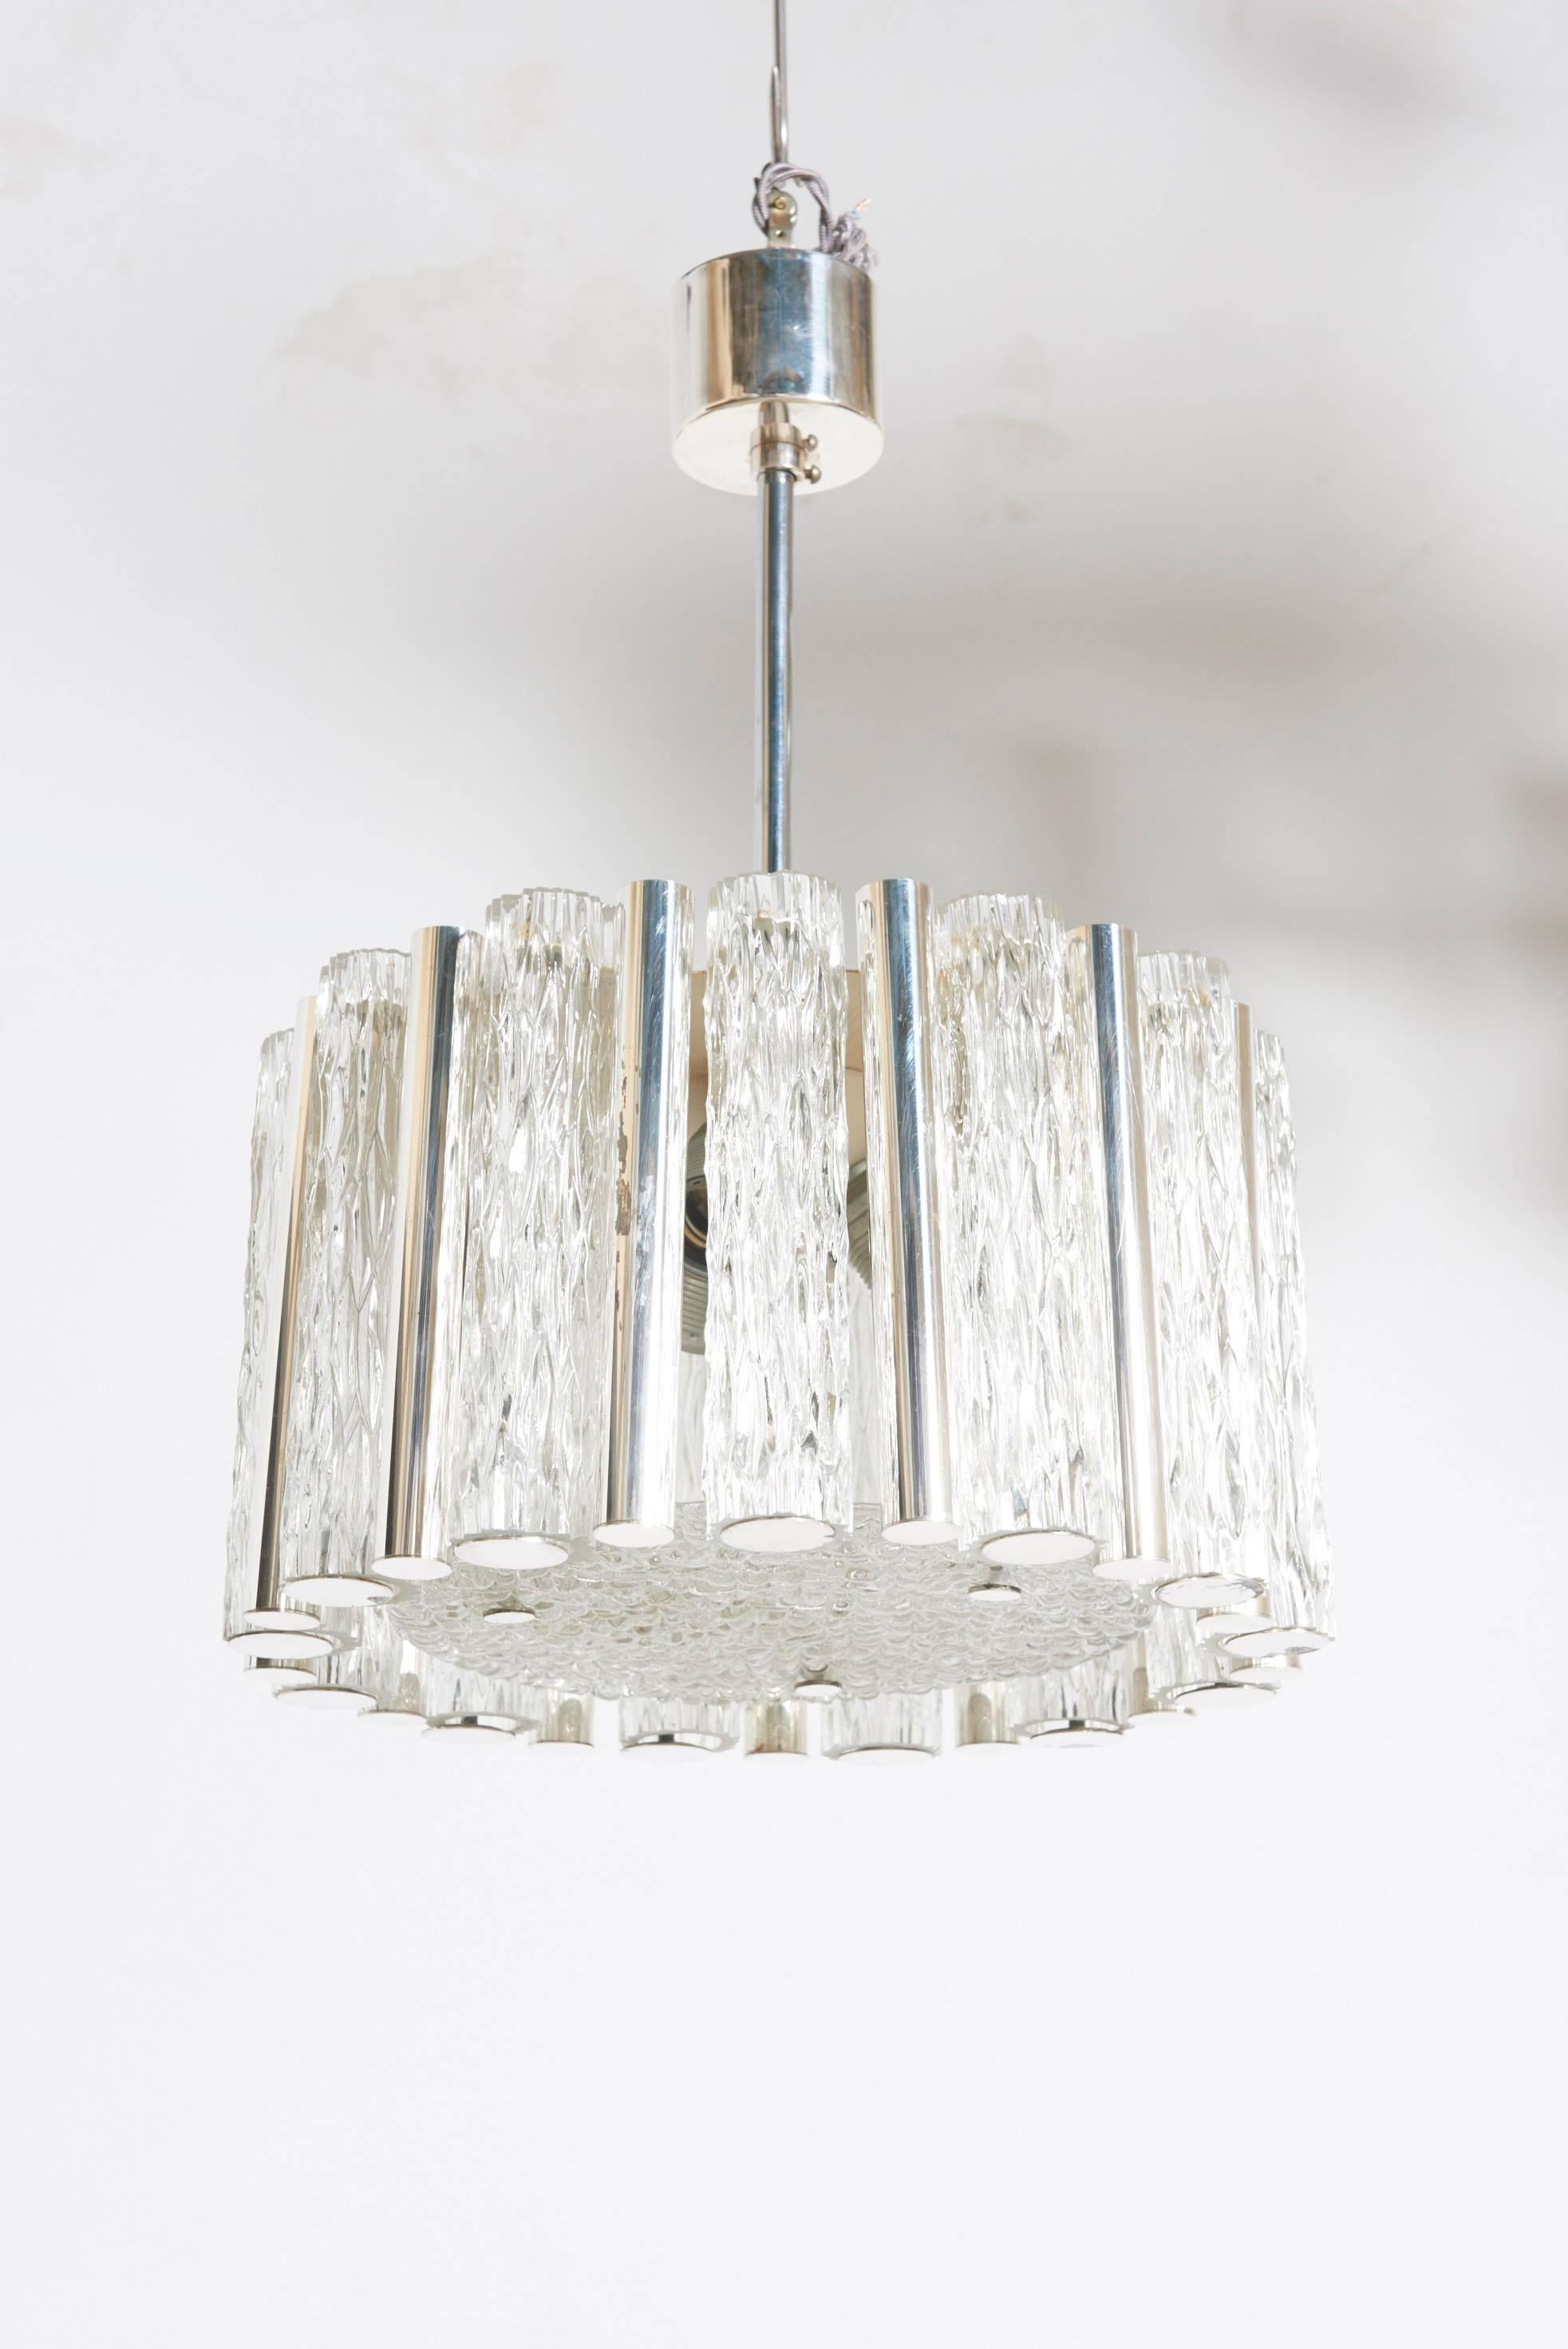 This chandelier cast beautiful light through clear patterned ice glass and warm silver plated tubes.
Very good condition, rewired.